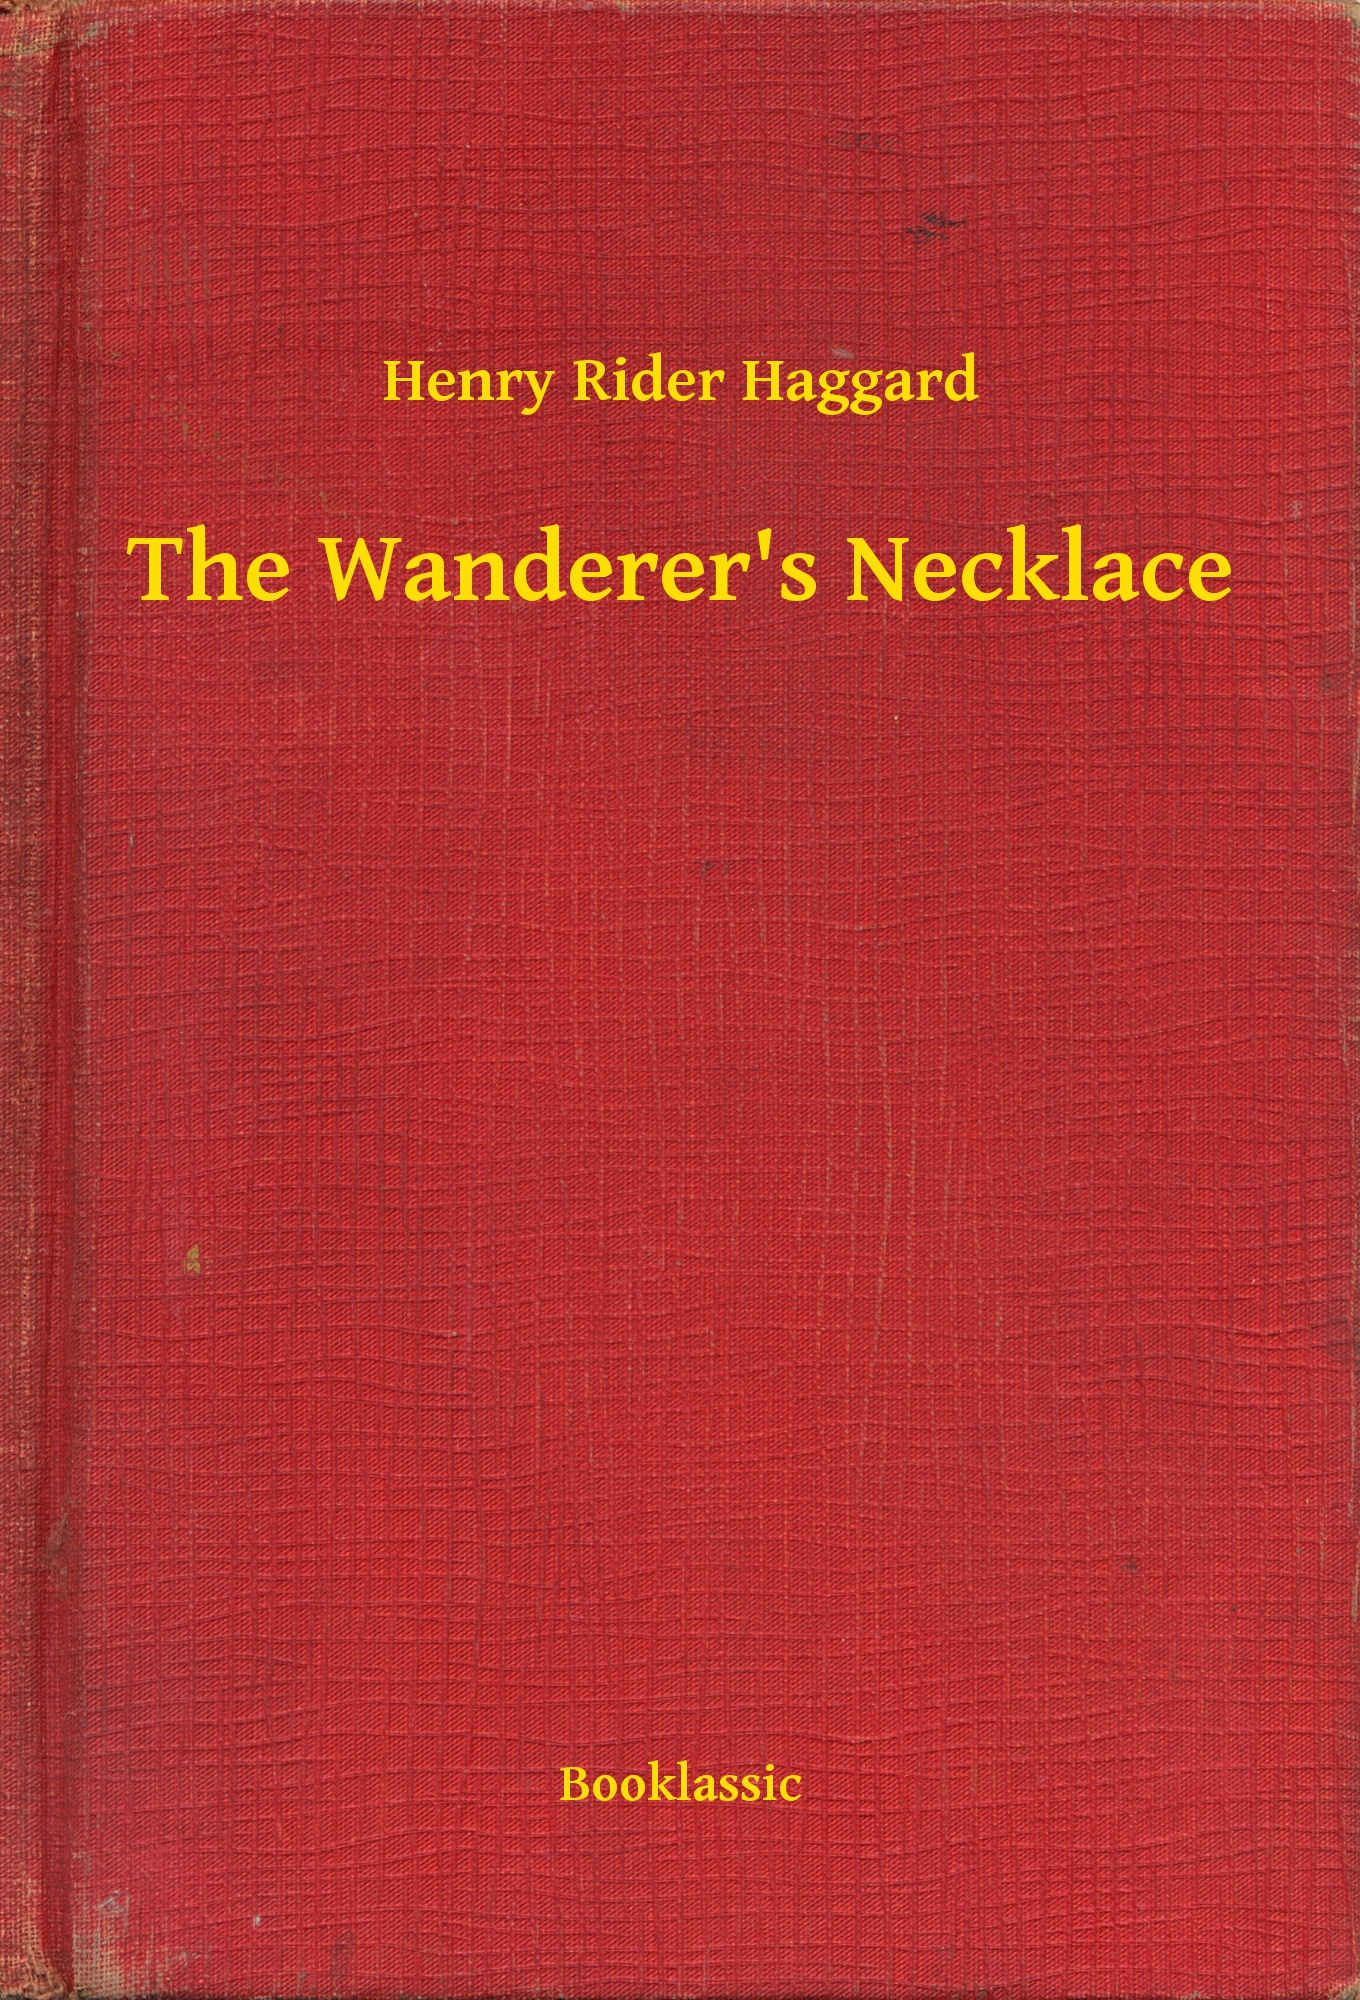 The Wanderer"s Necklace